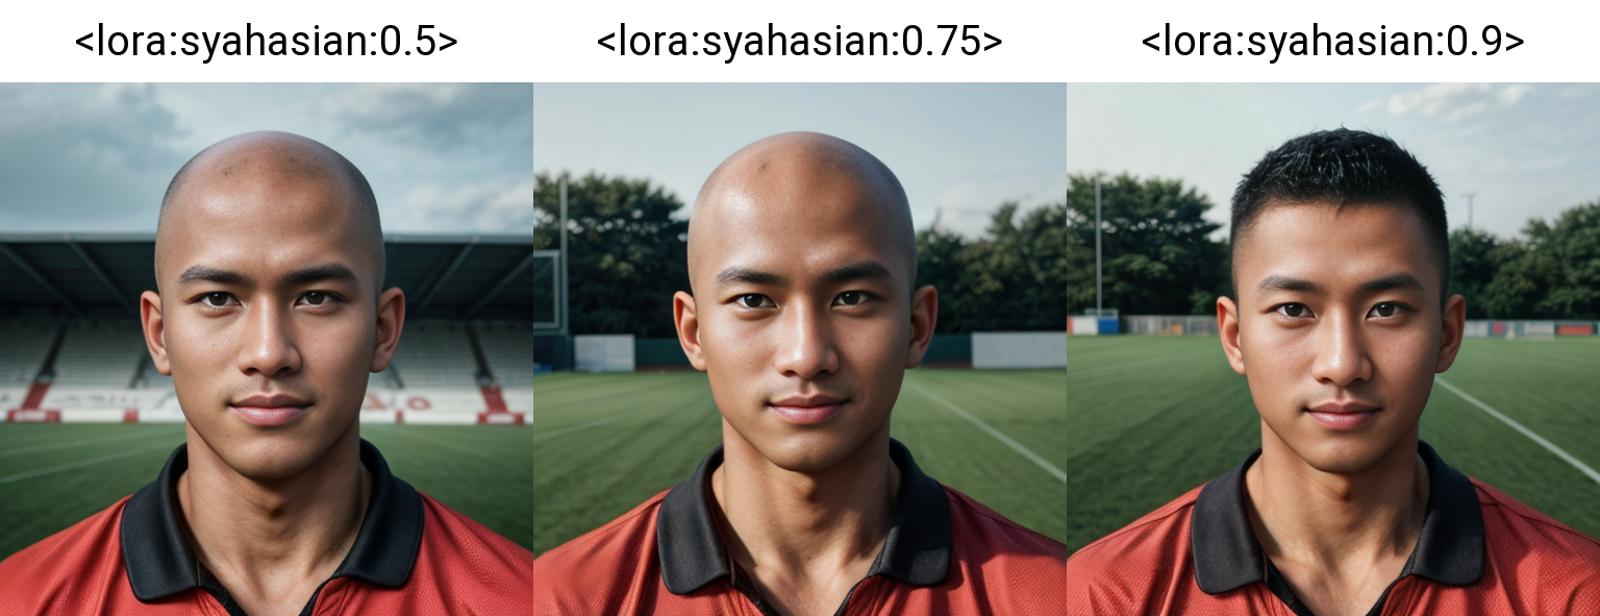 SYAHASIAN- Asian Men image by mbrother753435